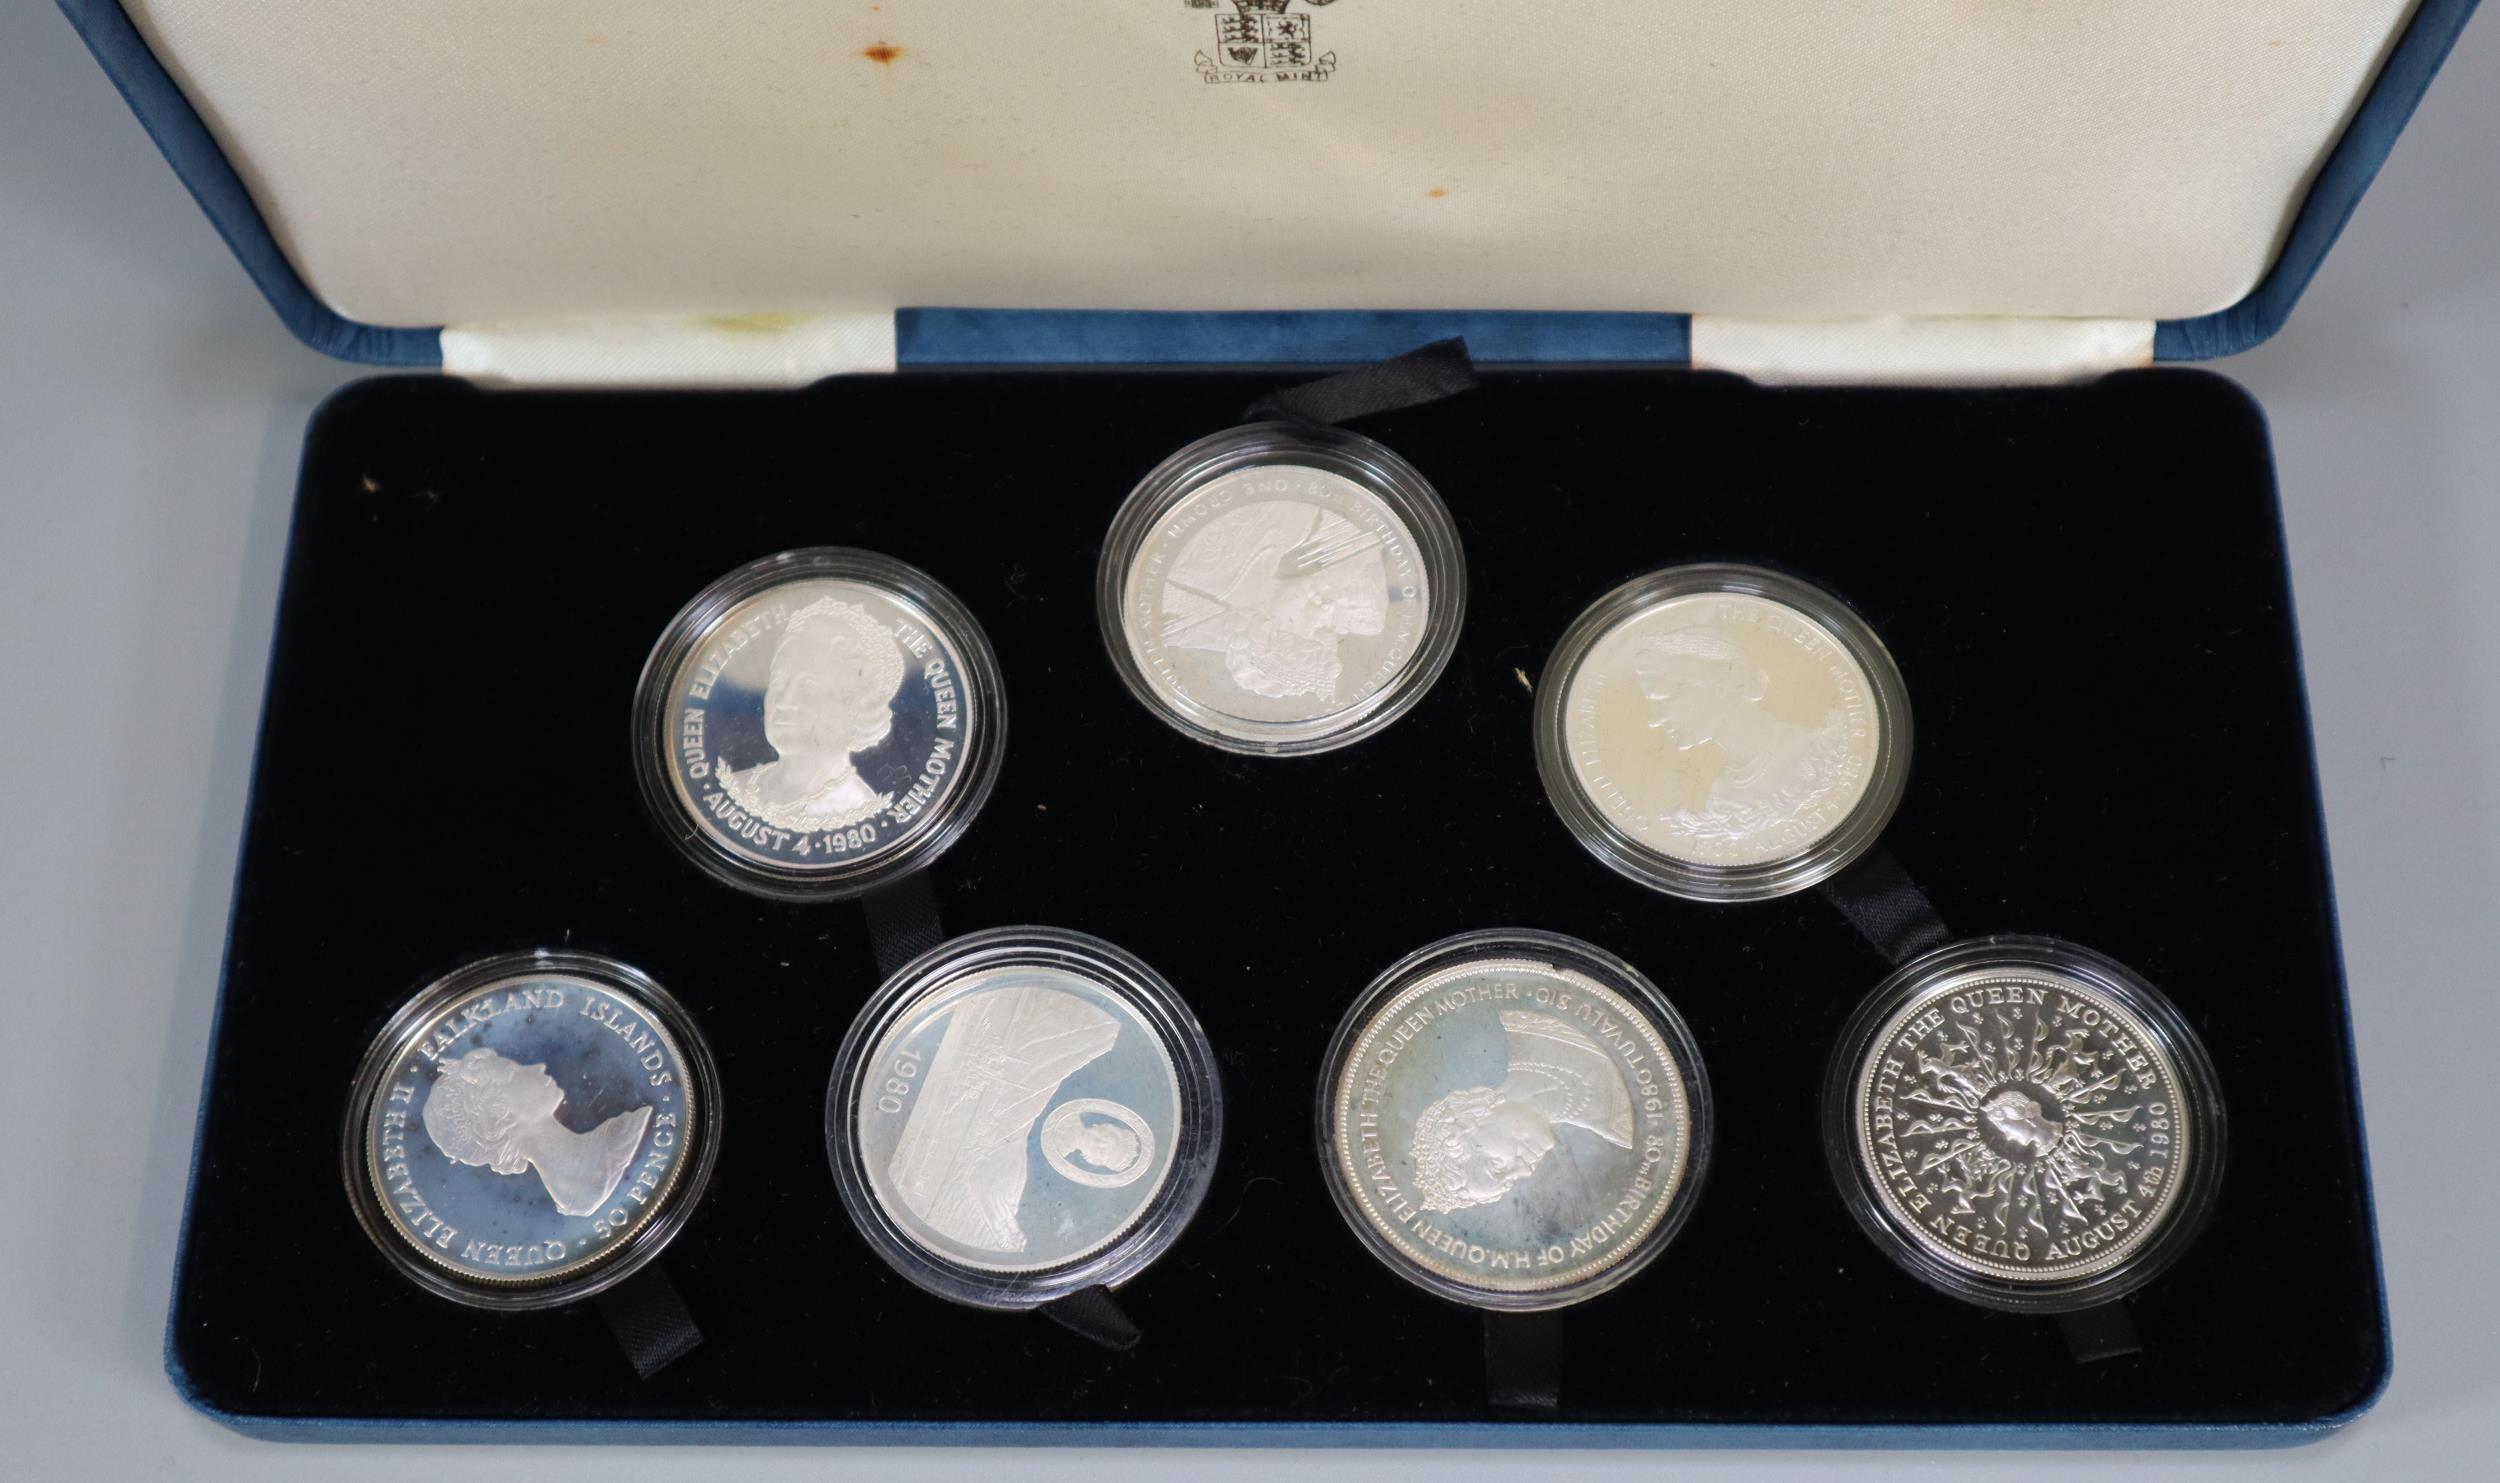 The Royal Mint silver Her Majesty Queen Elizabeth The Queen Mother 1988 coin collection, in original